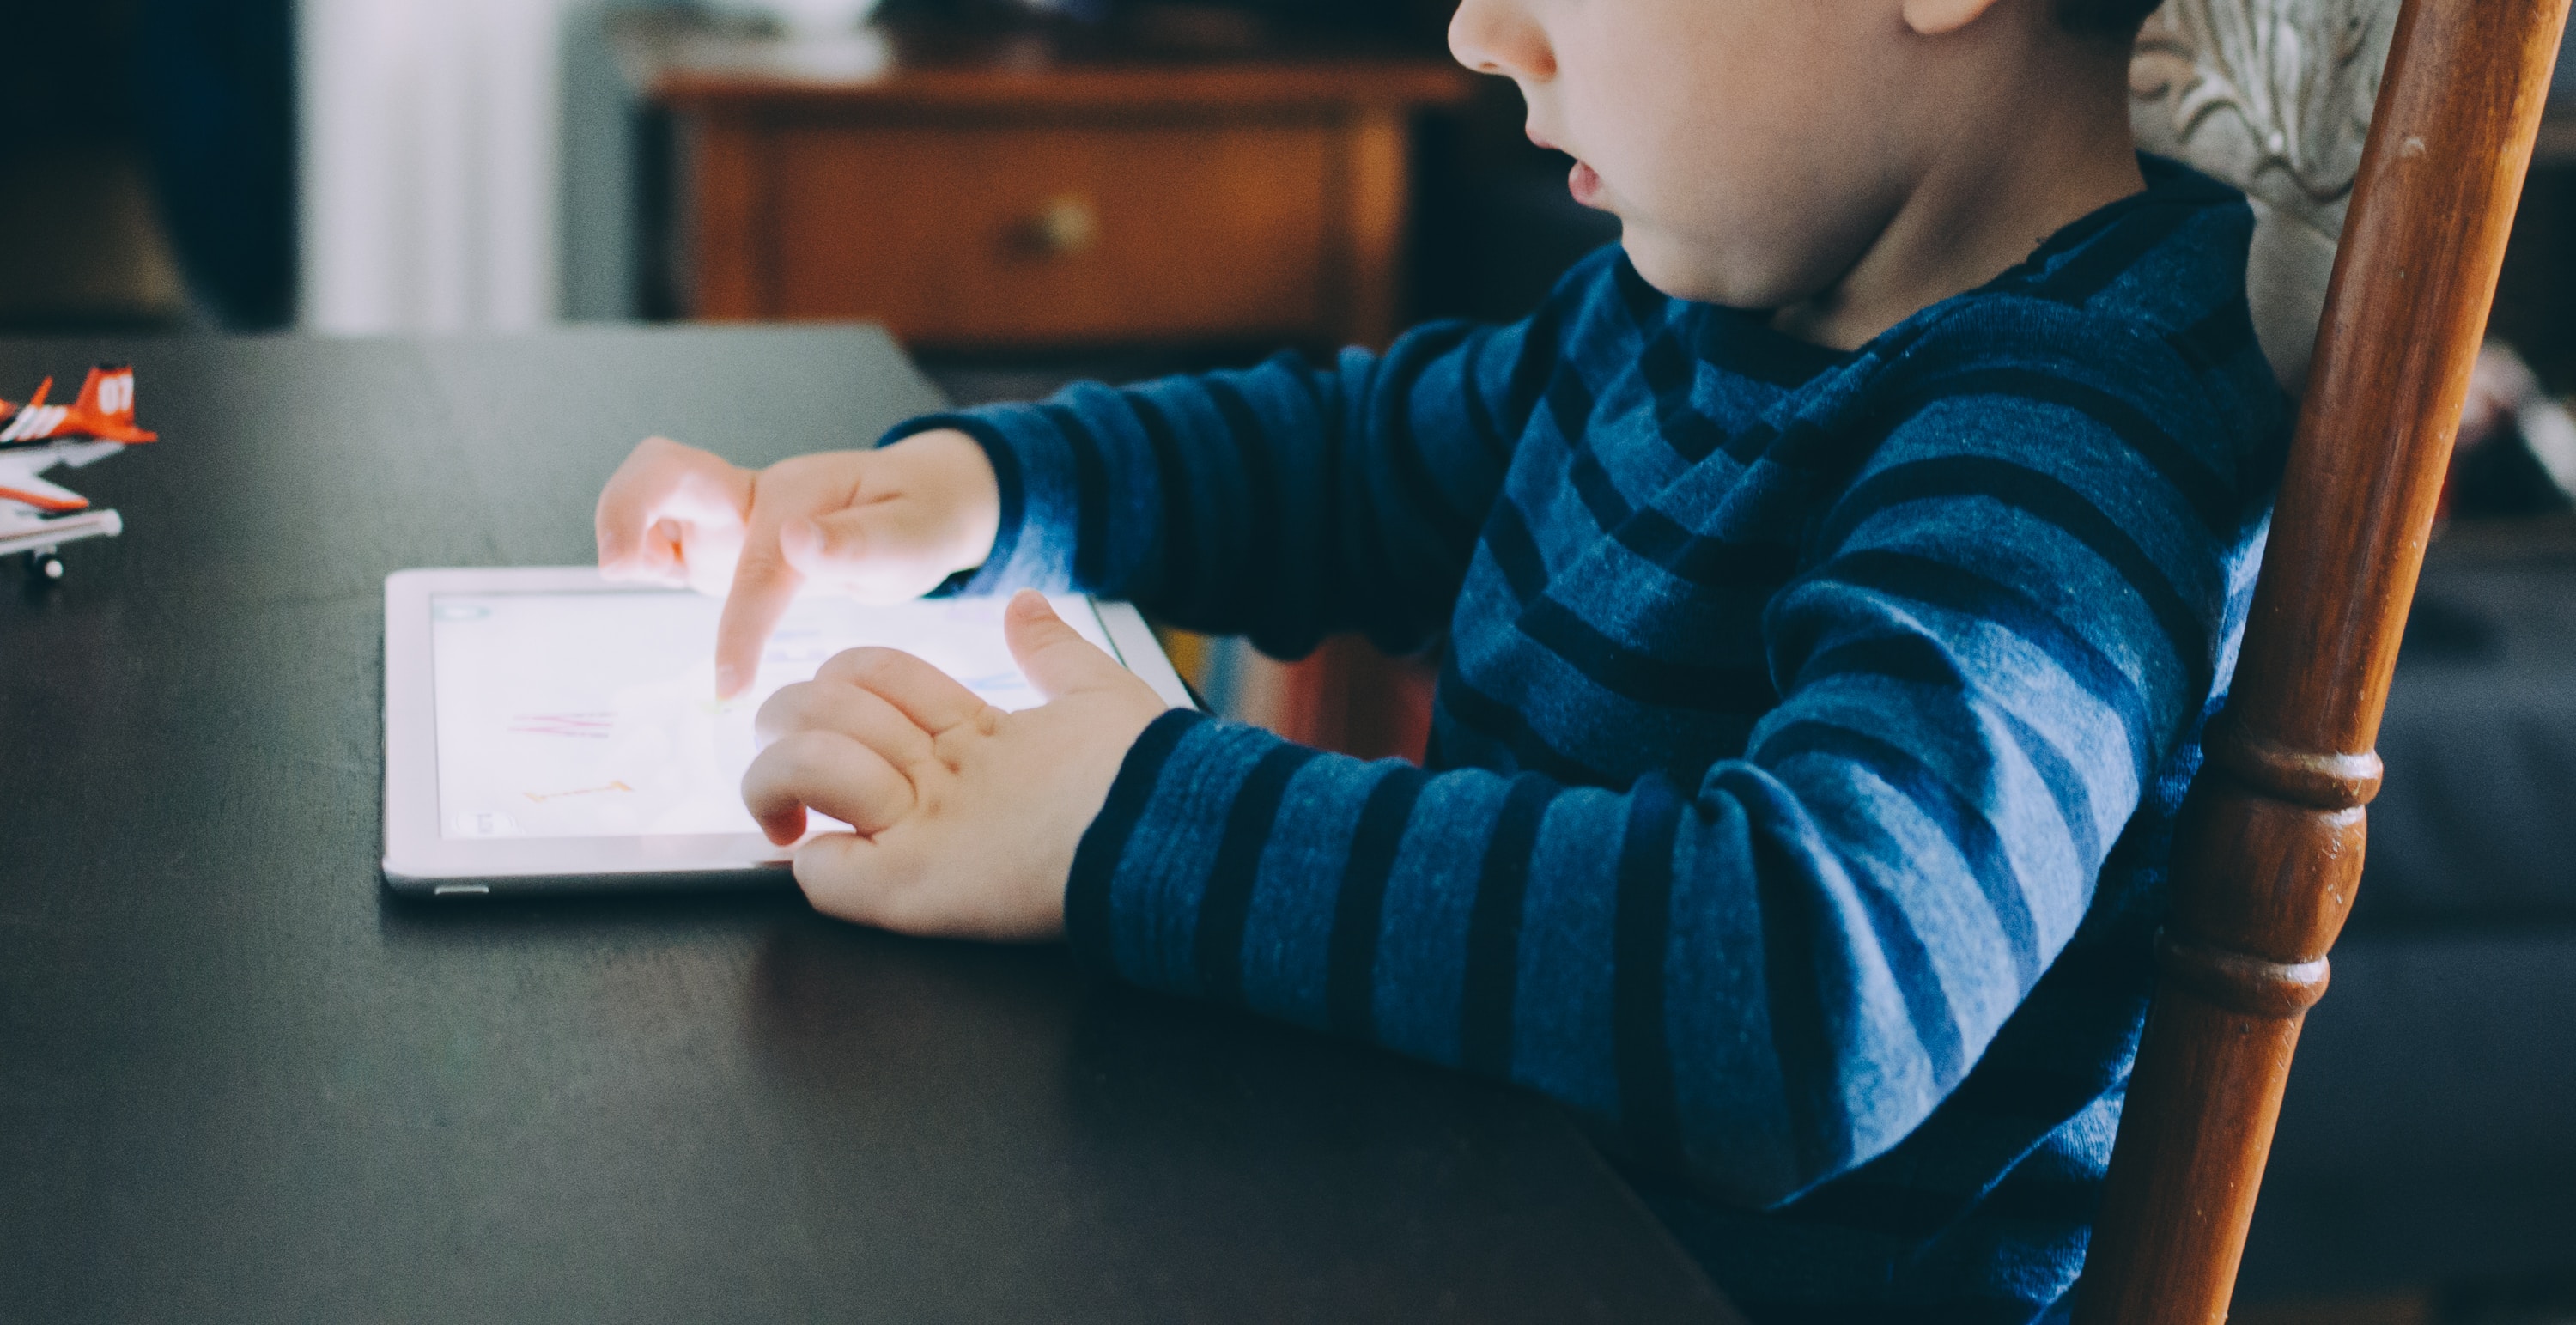 image of child typing on ipad screen